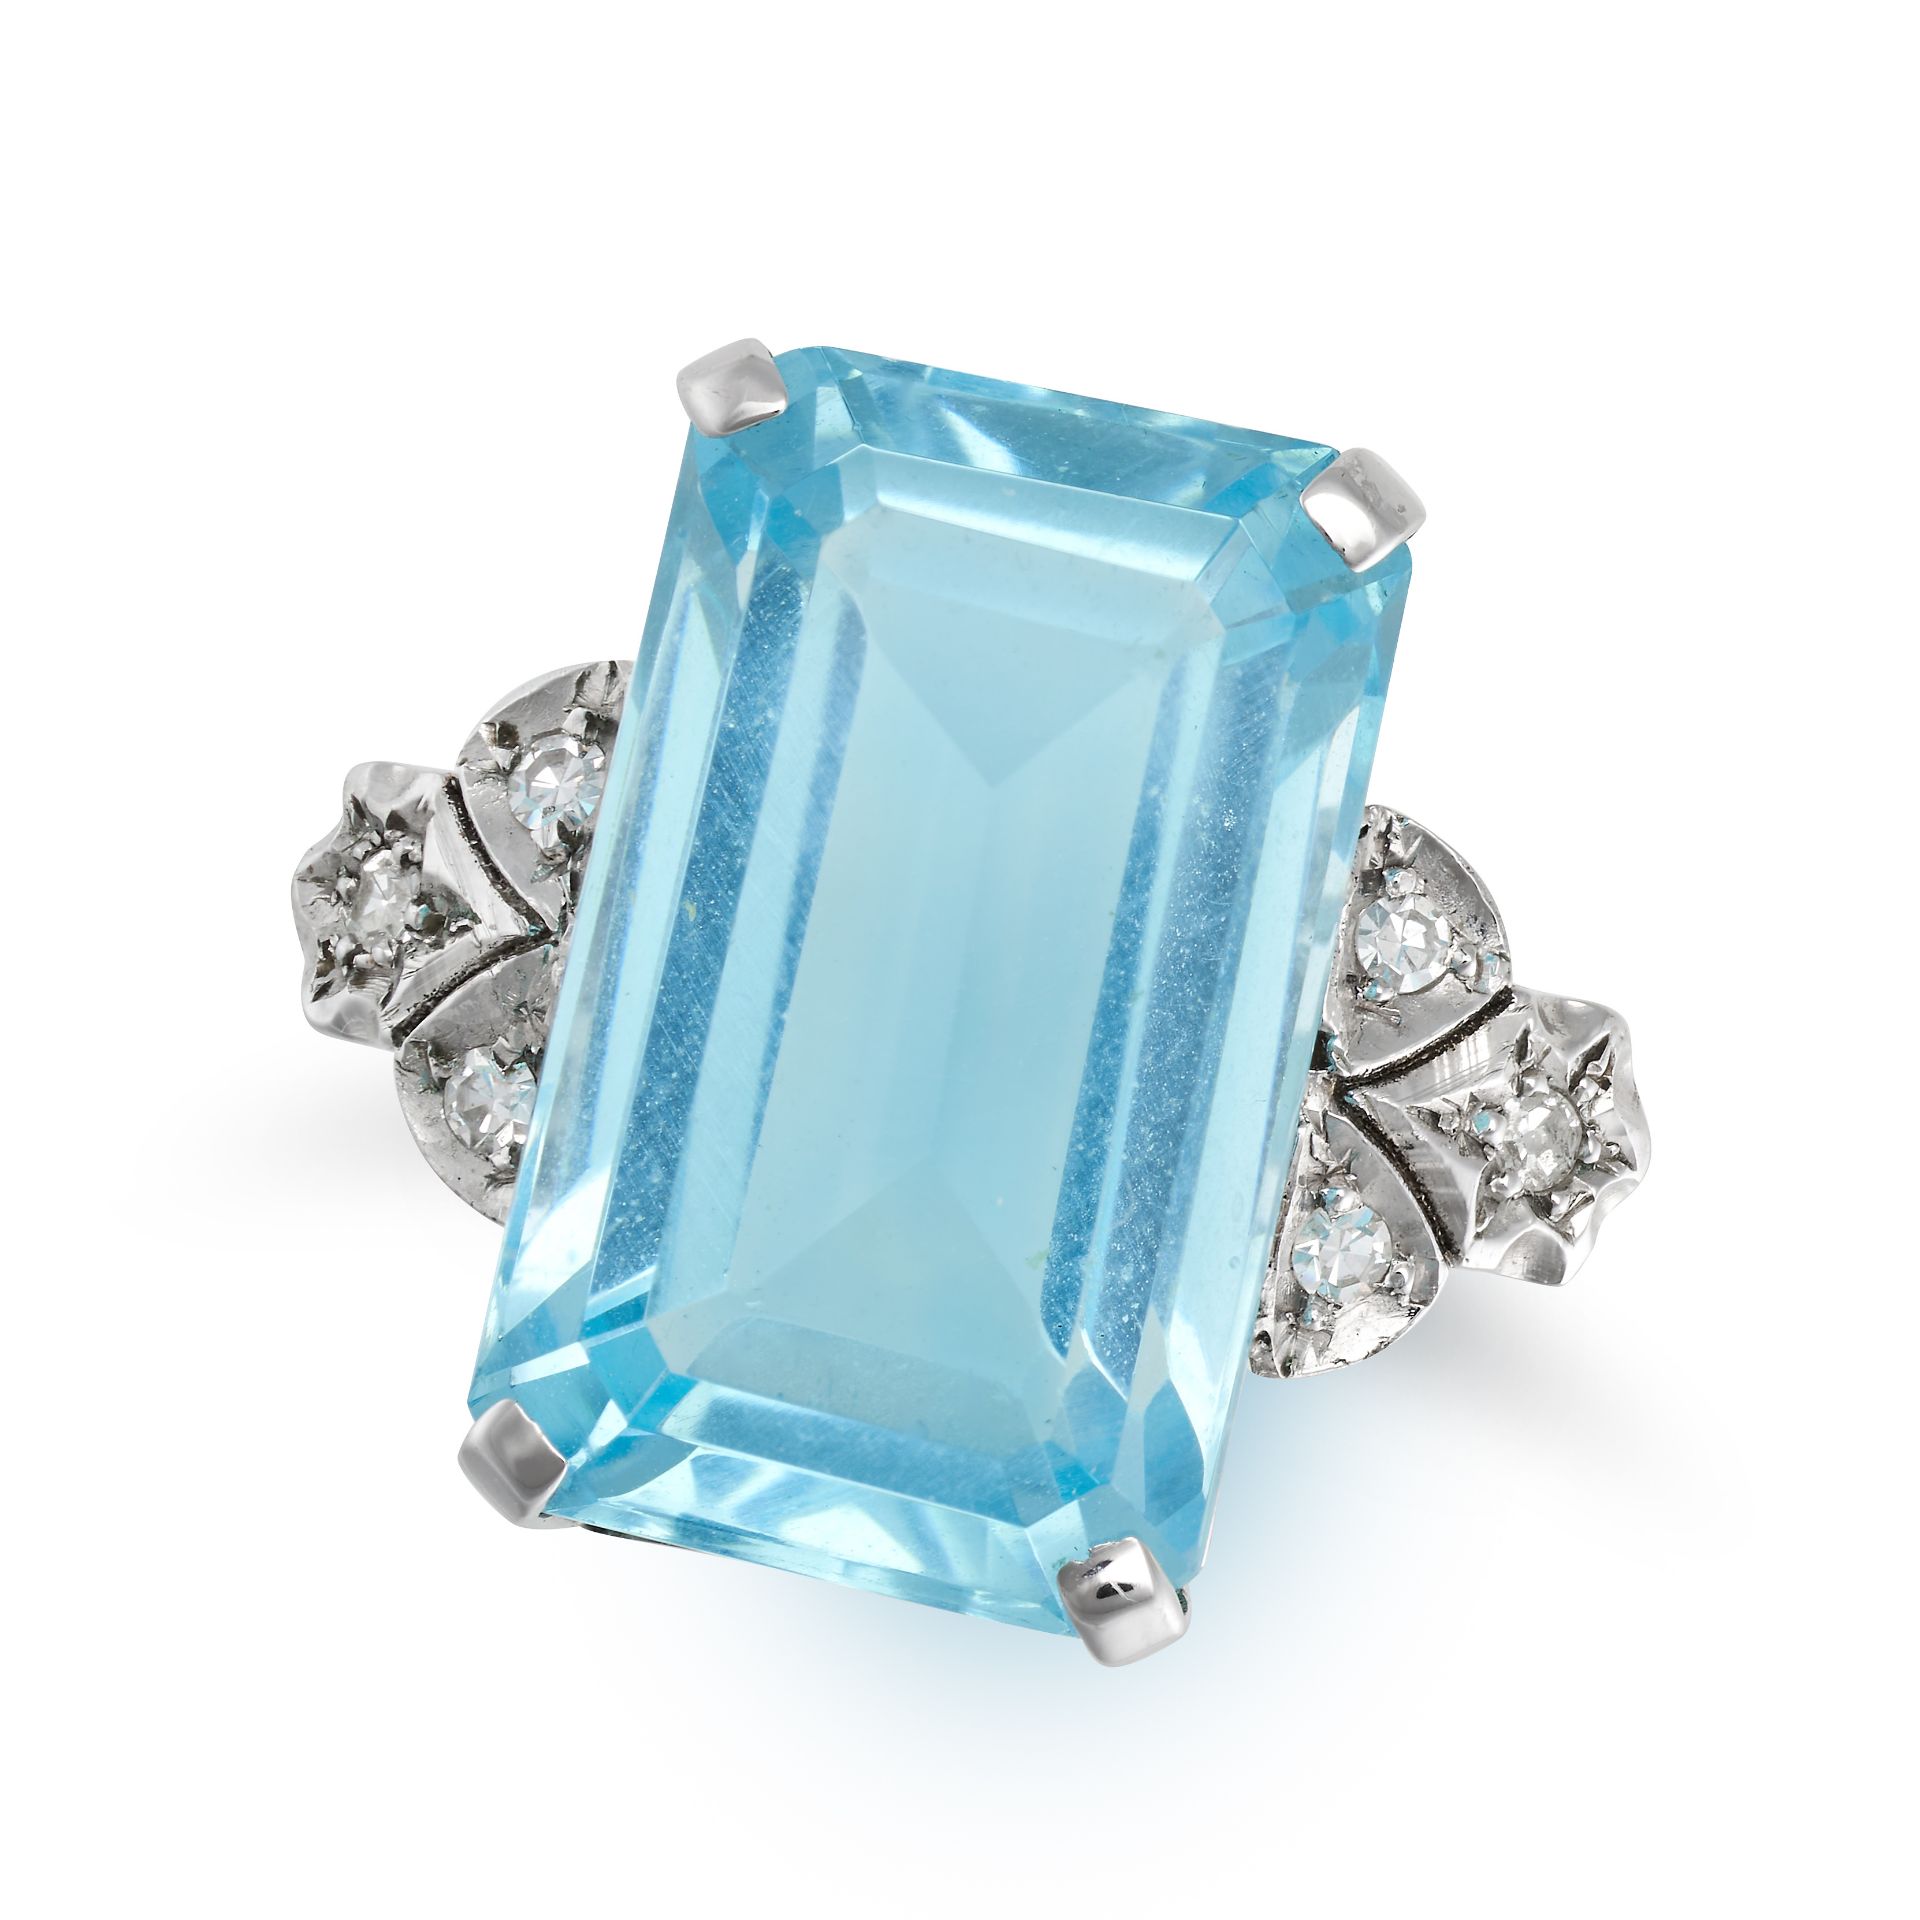 NO RESERVE - A BLUE GLASS AND DIAMOND RING in white gold, set with an octagonal step cut glue gla...